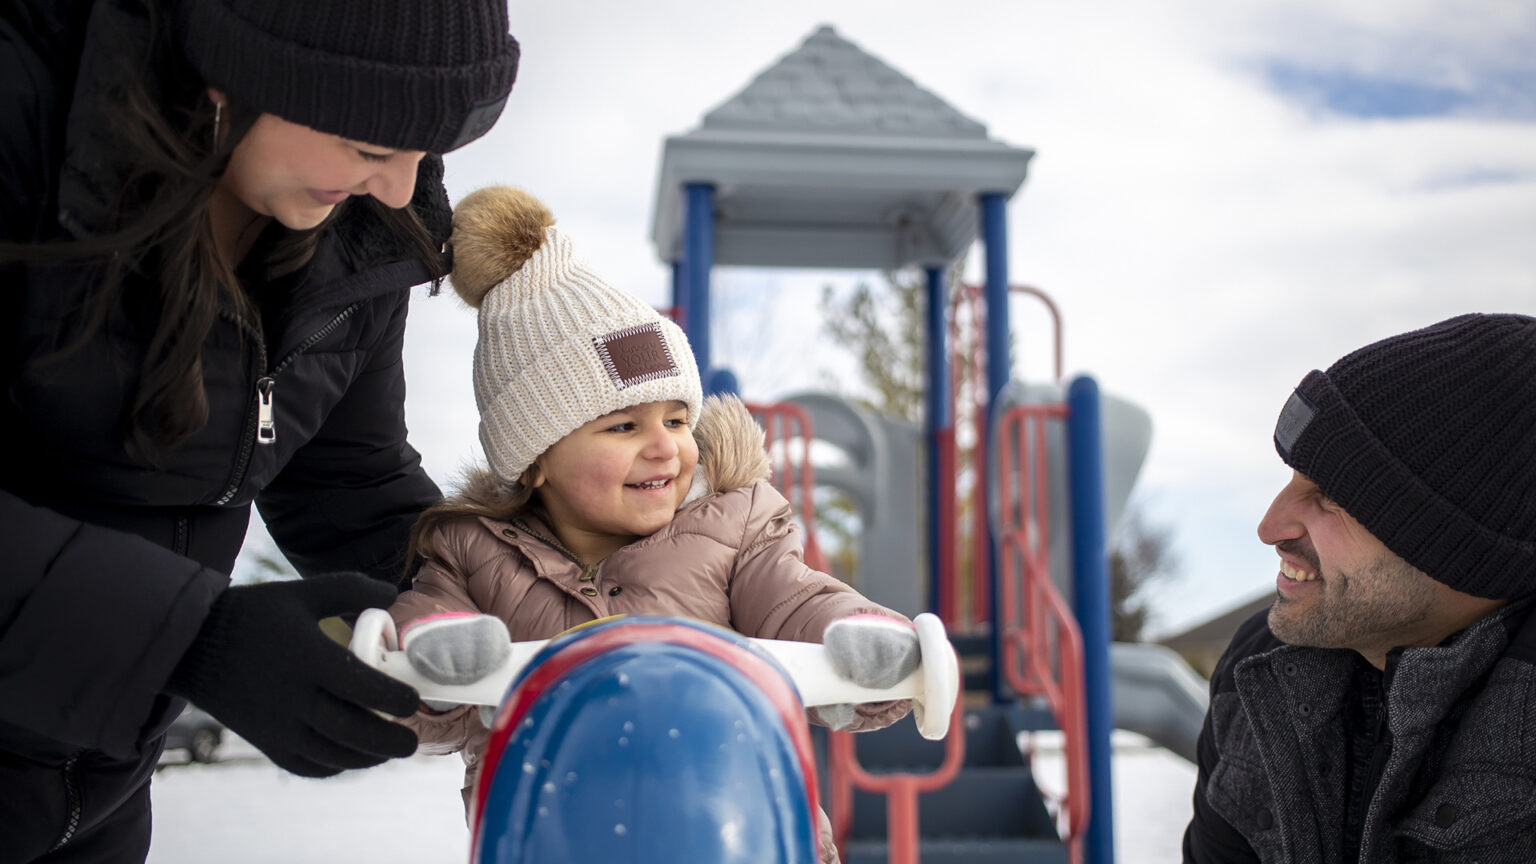 Jennifer Gonzalez and Mario Gonzalez stand and crouch, respectively, on either side of their daughter, who is seated on playground equipment with snow on the ground.